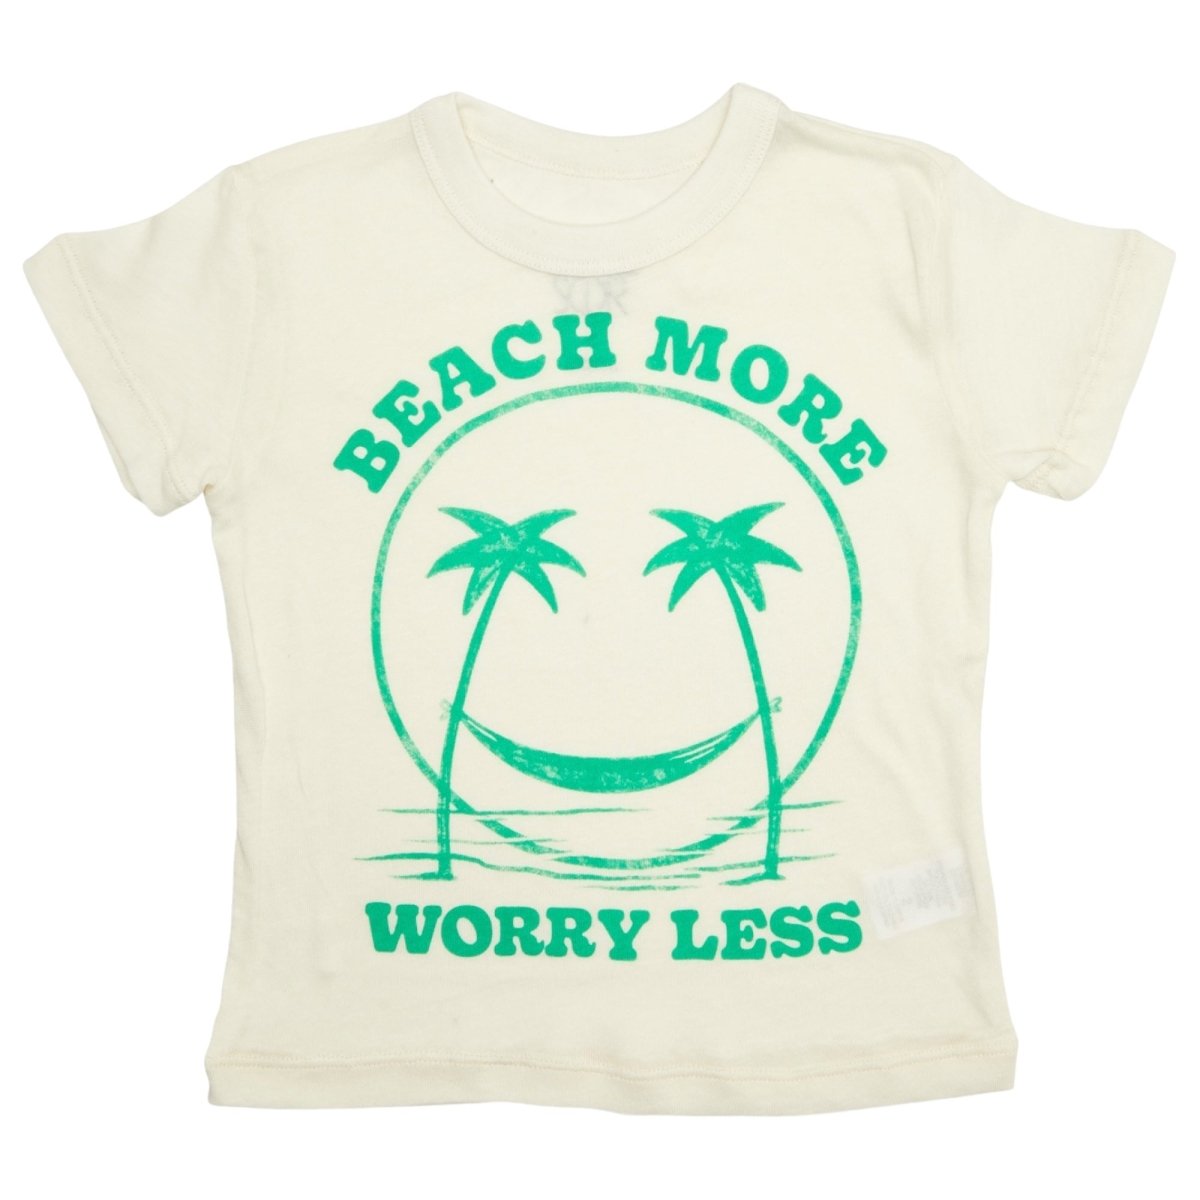 BEACH MORE WORRY LESS TSHIRT - CHASER KIDS